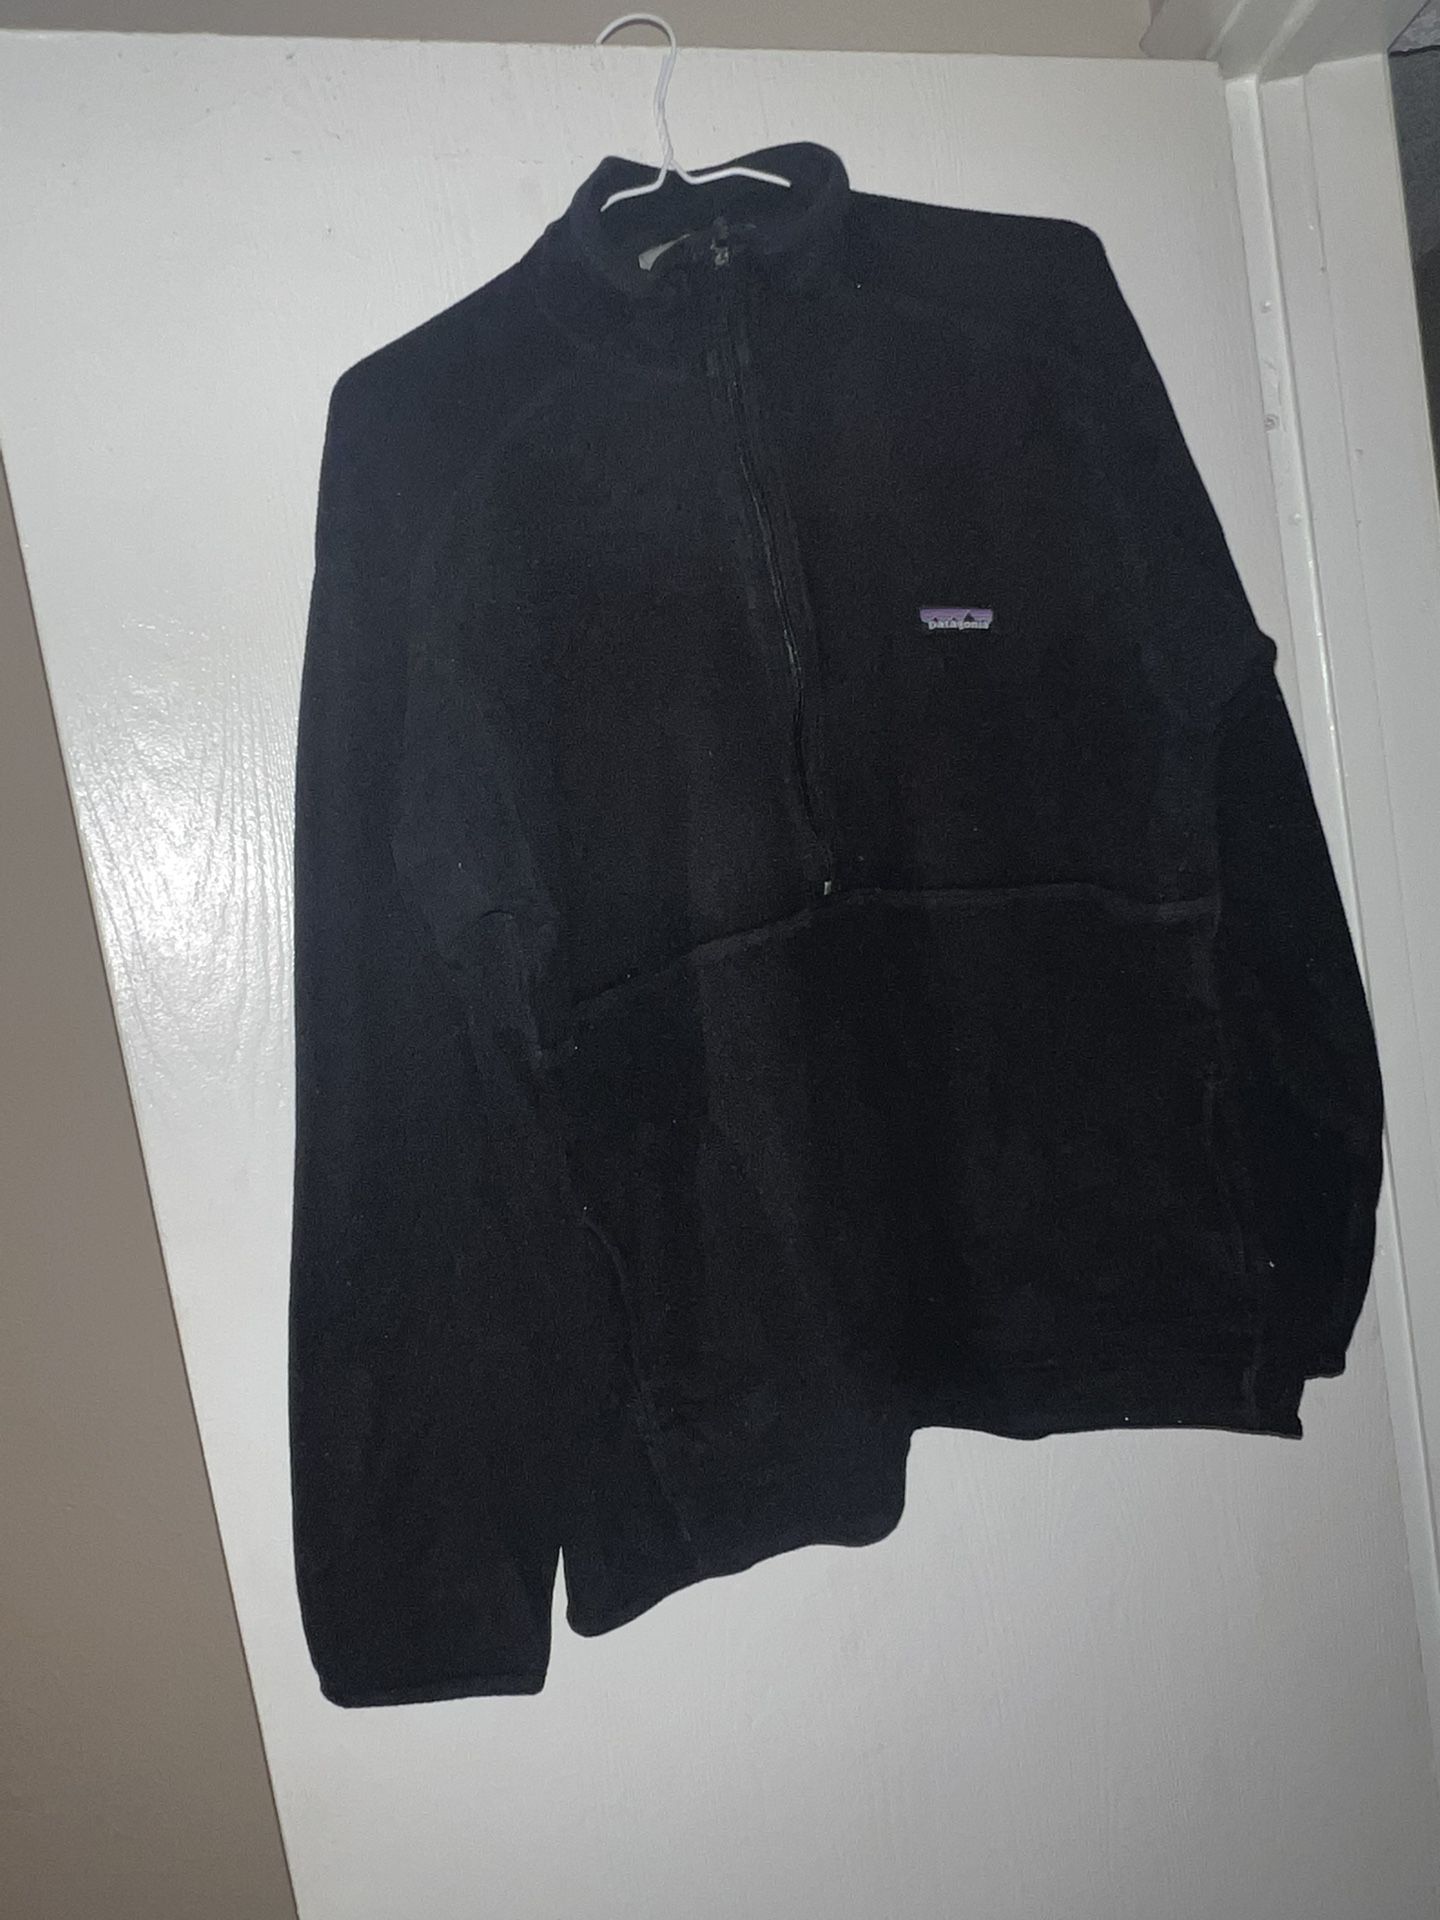 Patagonia Pull Over Zip Up